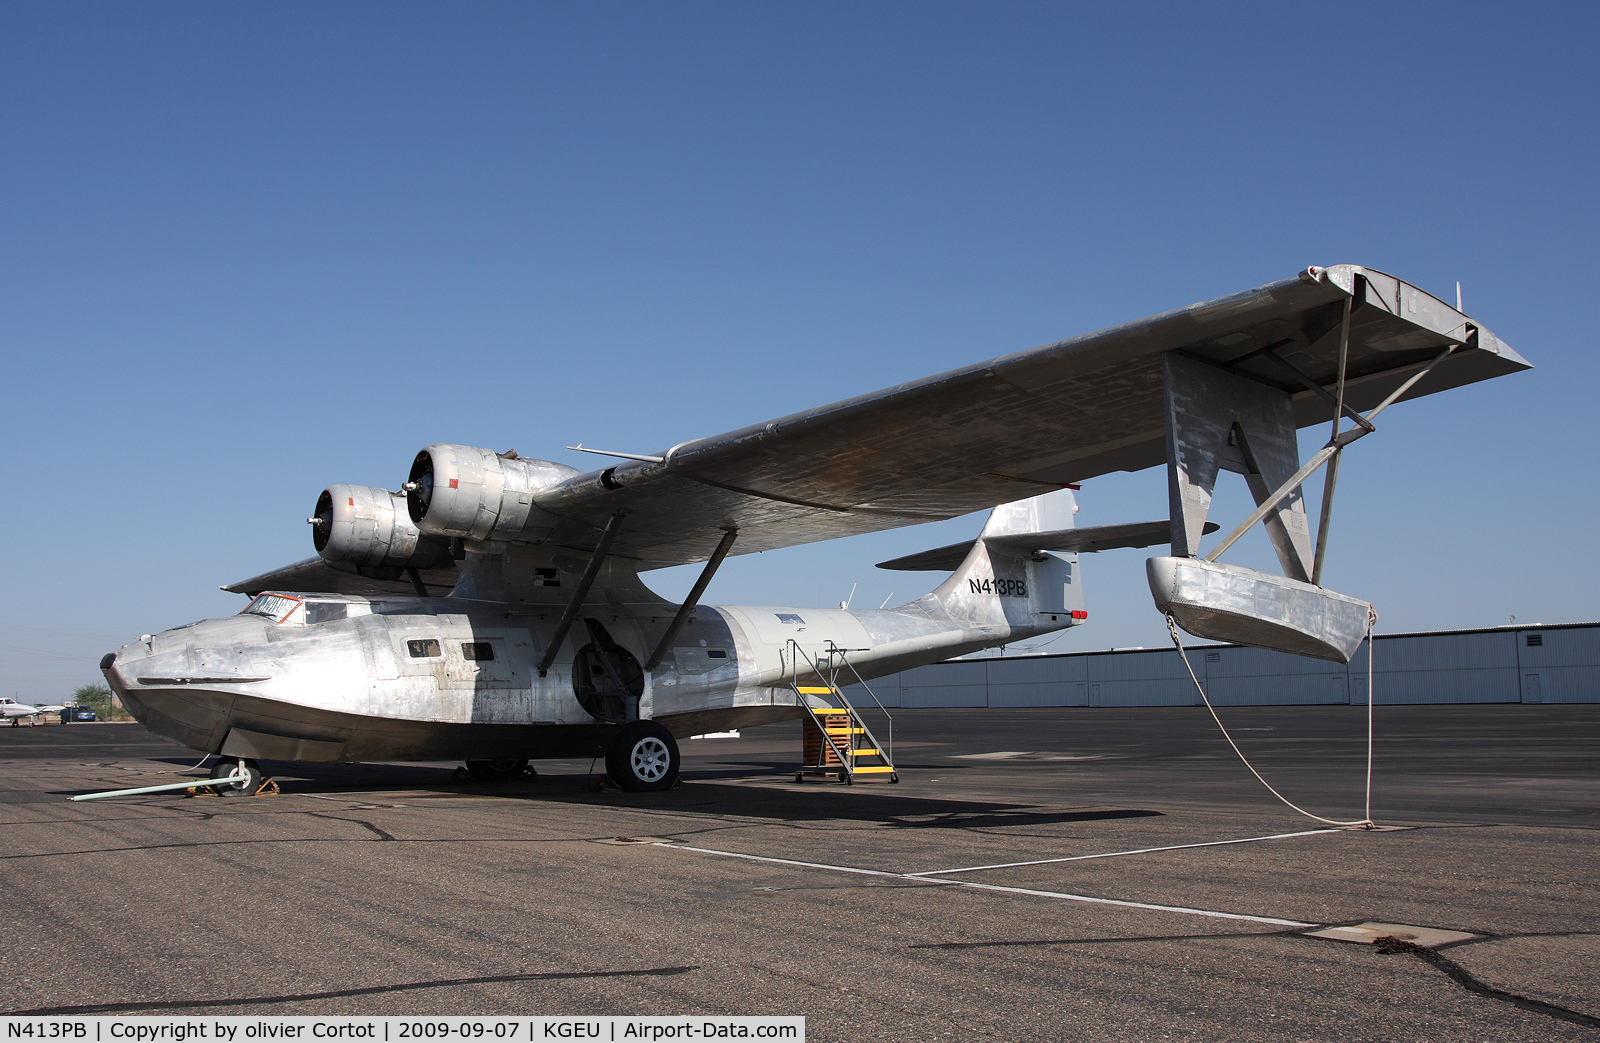 N413PB, Consolidated PBY-5A Catalina C/N CV343, Unexpected encounter at Glendale, AZ